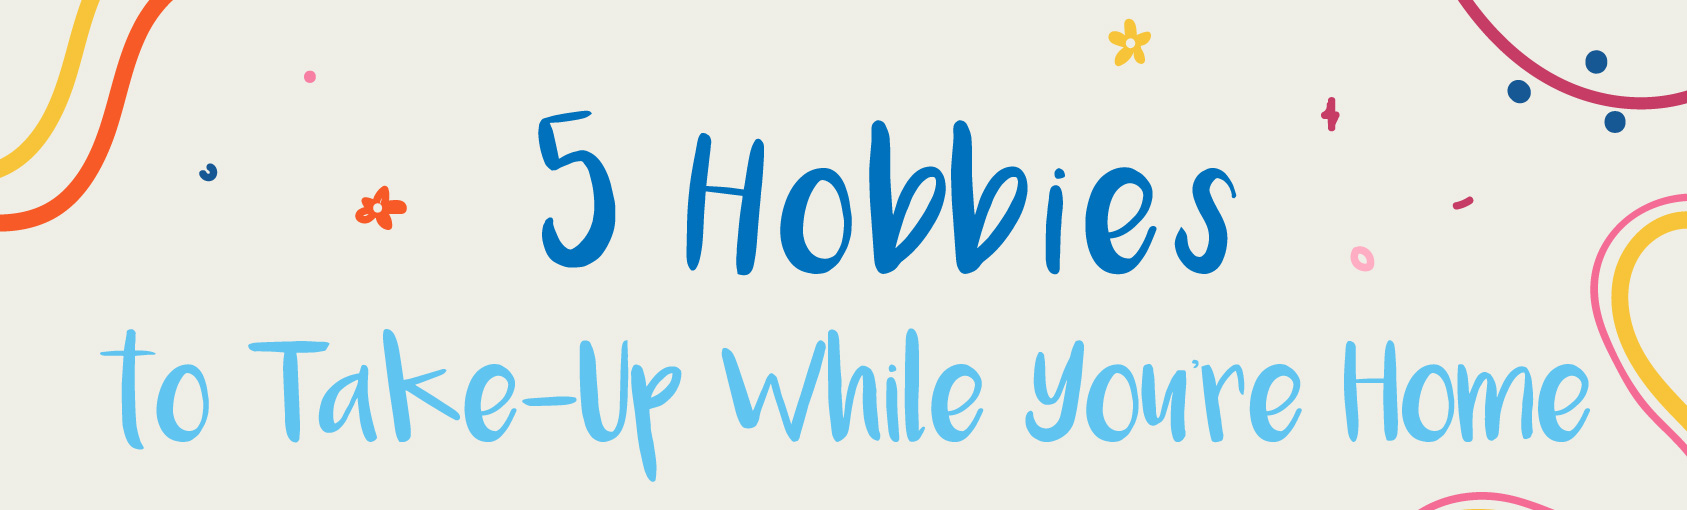 5 Hobbies to Take-Up While You’re Home banner